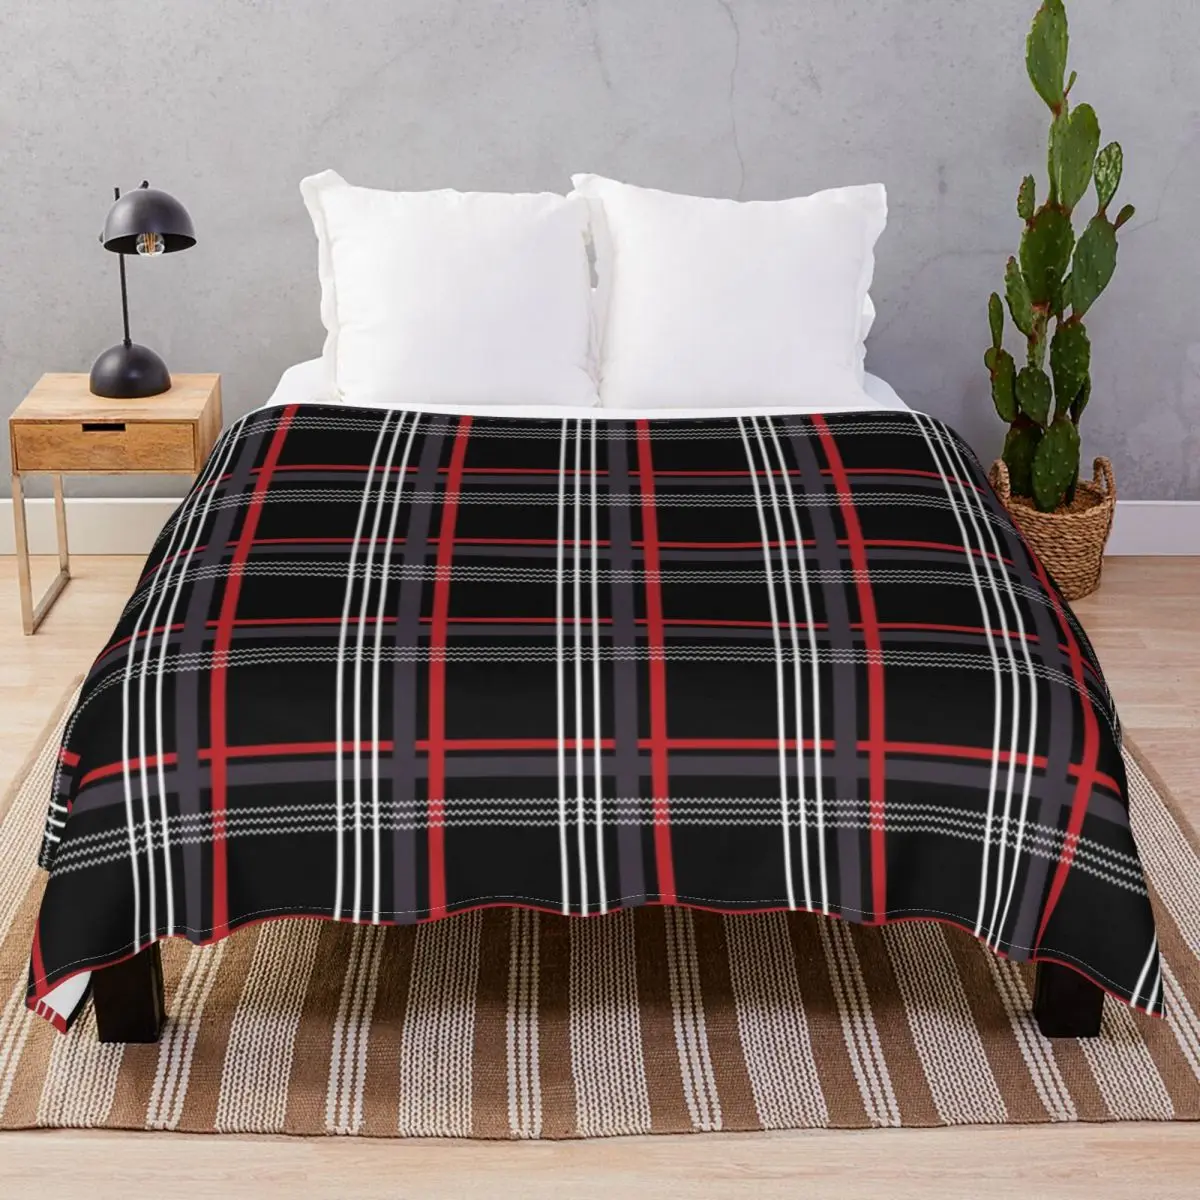 GTi Tartan Blankets Velvet Spring/Autumn Comfortable Throw Blanket for Bed Home Couch Camp Cinema